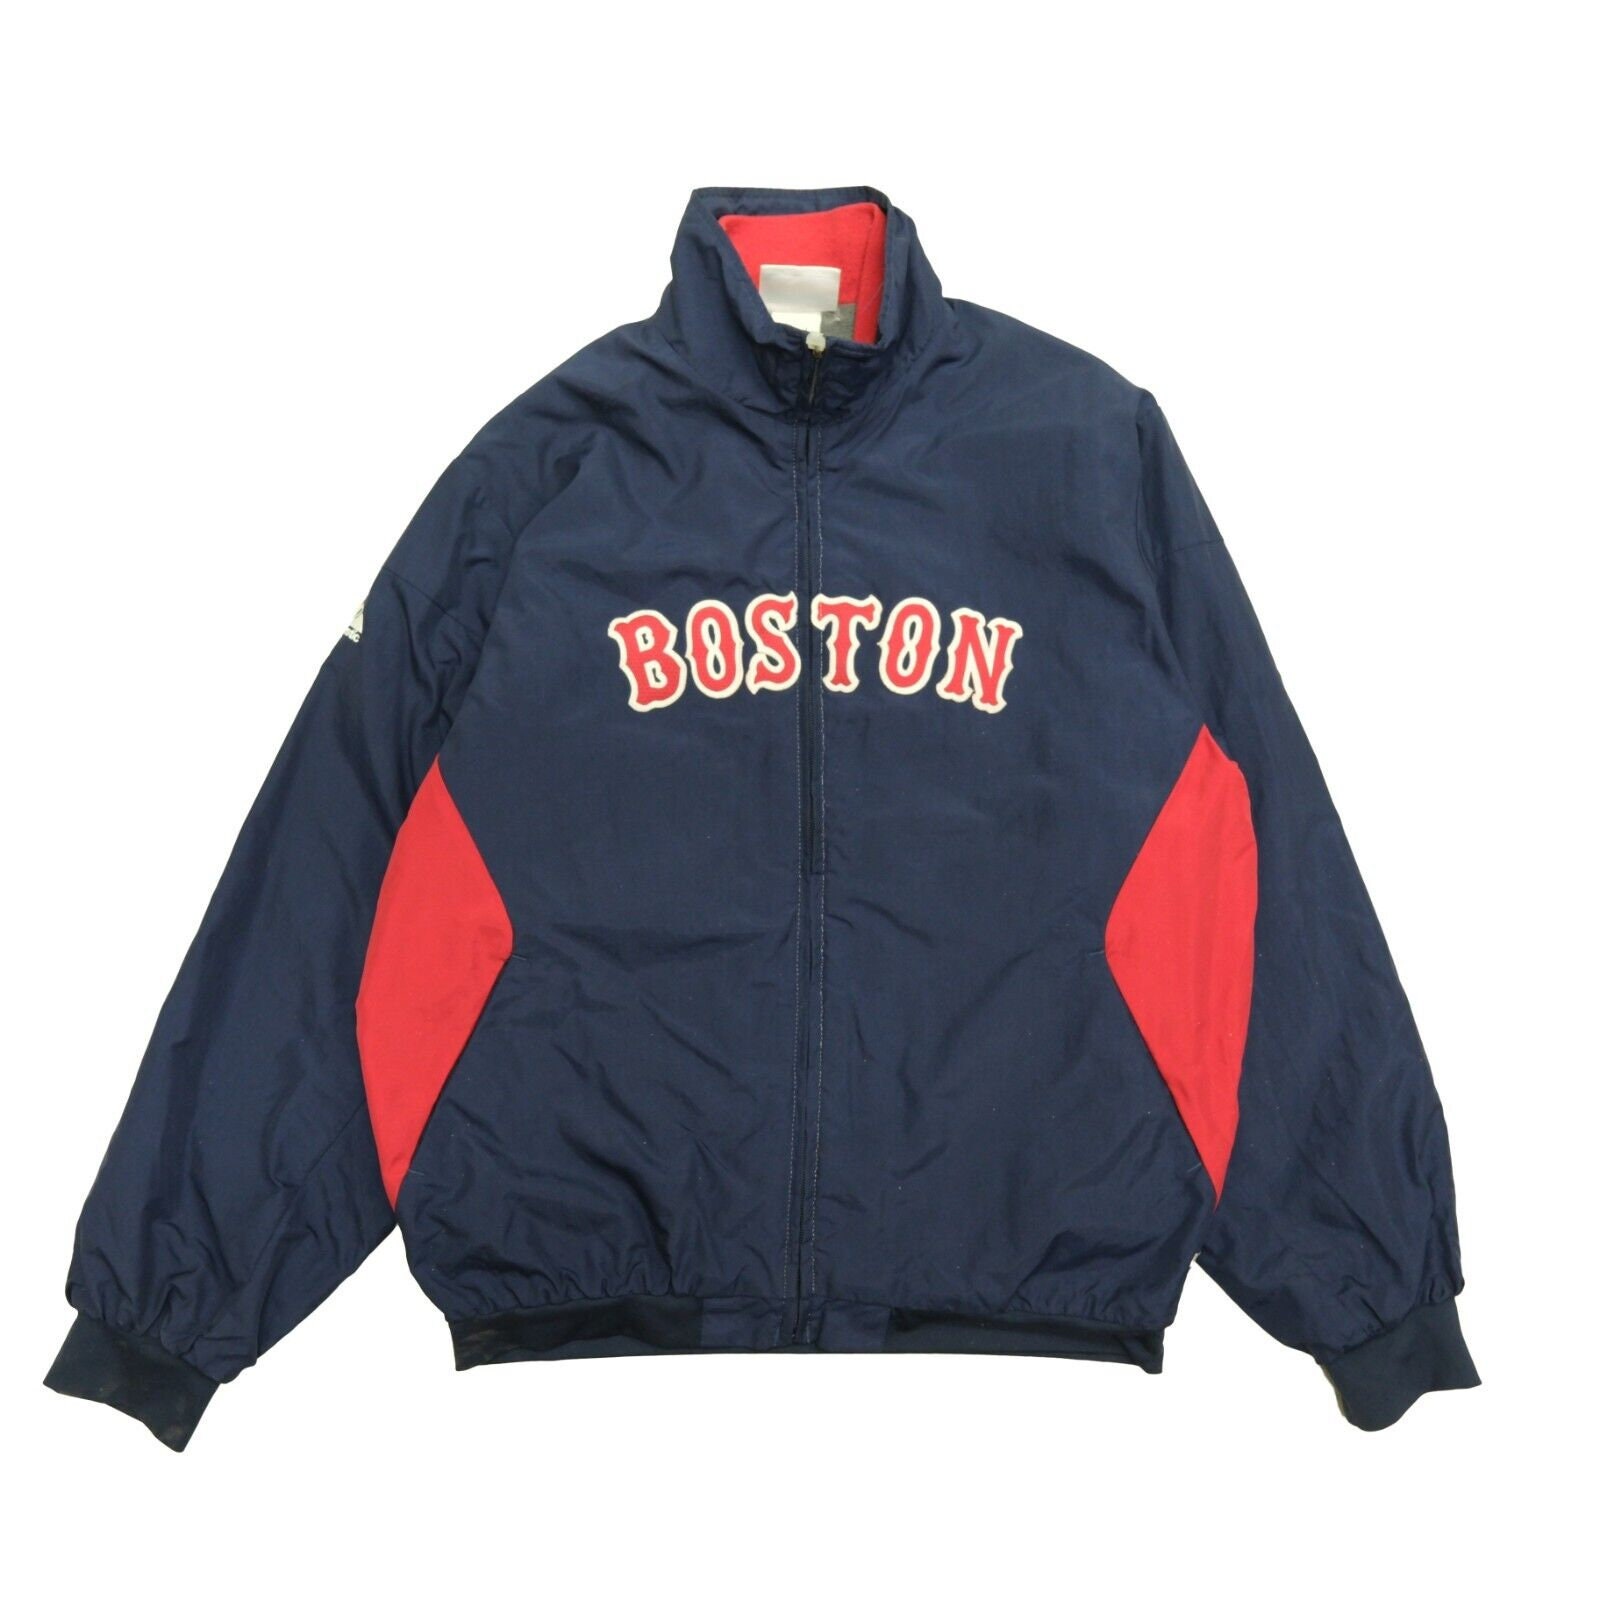 Vintage Red Sox lightweight Baseball Jacket Authentic Collection Majestic  Kids Size Small